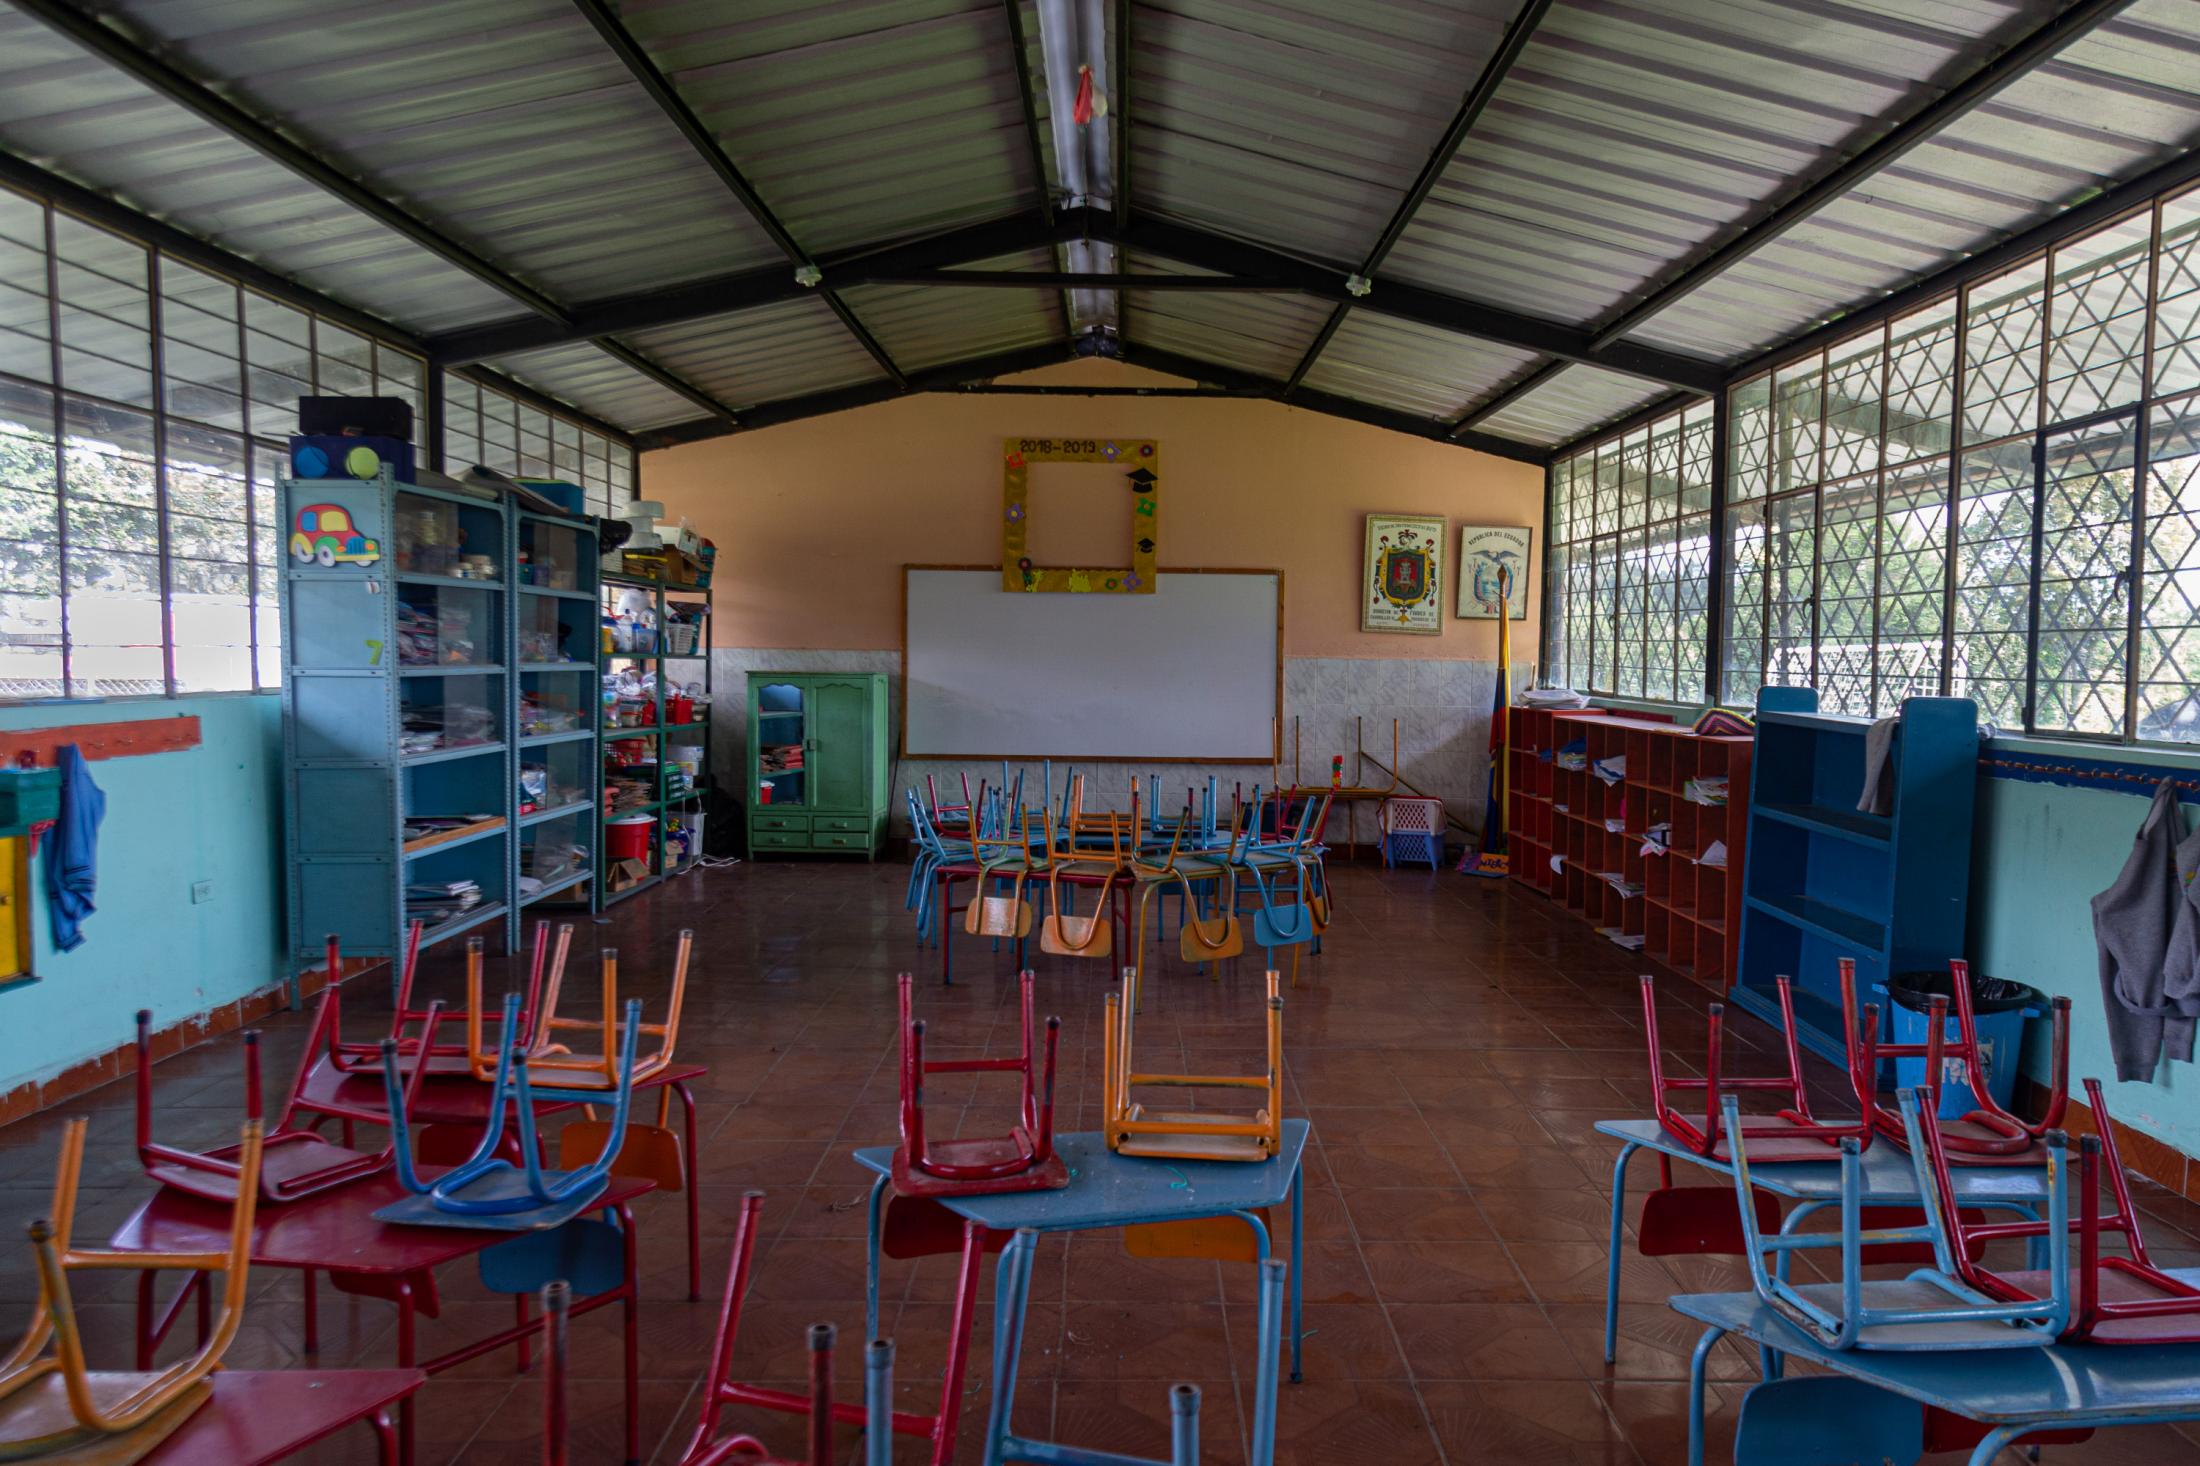 One of the classrooms of Ruperto Alarc&oacute;n Falcon&iacute; Elementary School, in...